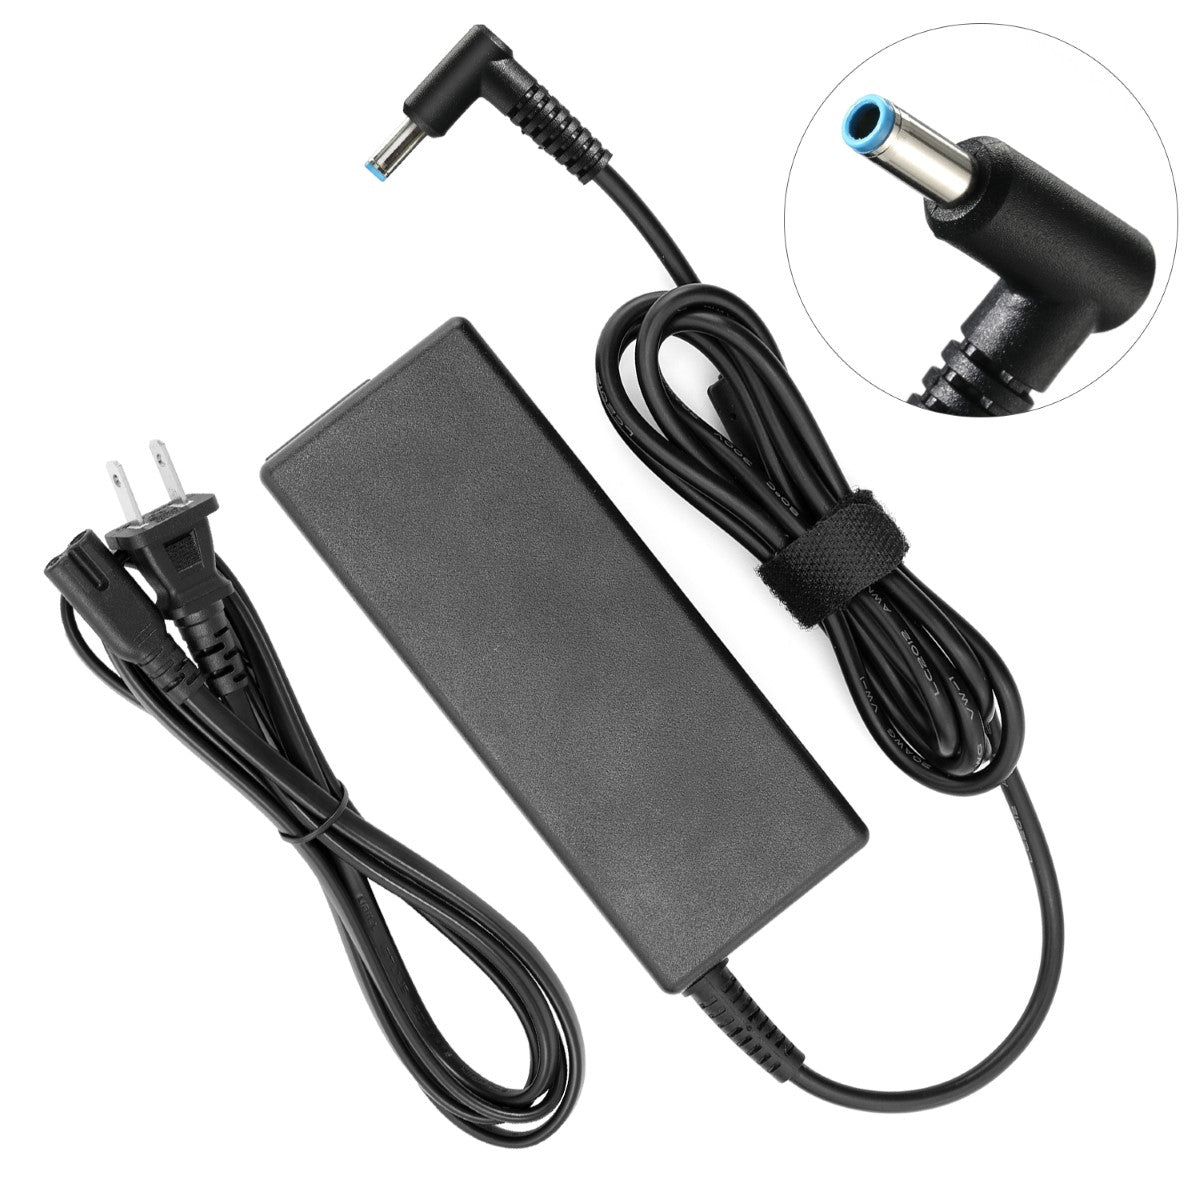 AC Adapter Charger for HP Envy TouchSmart 15-j009wm Notebook.